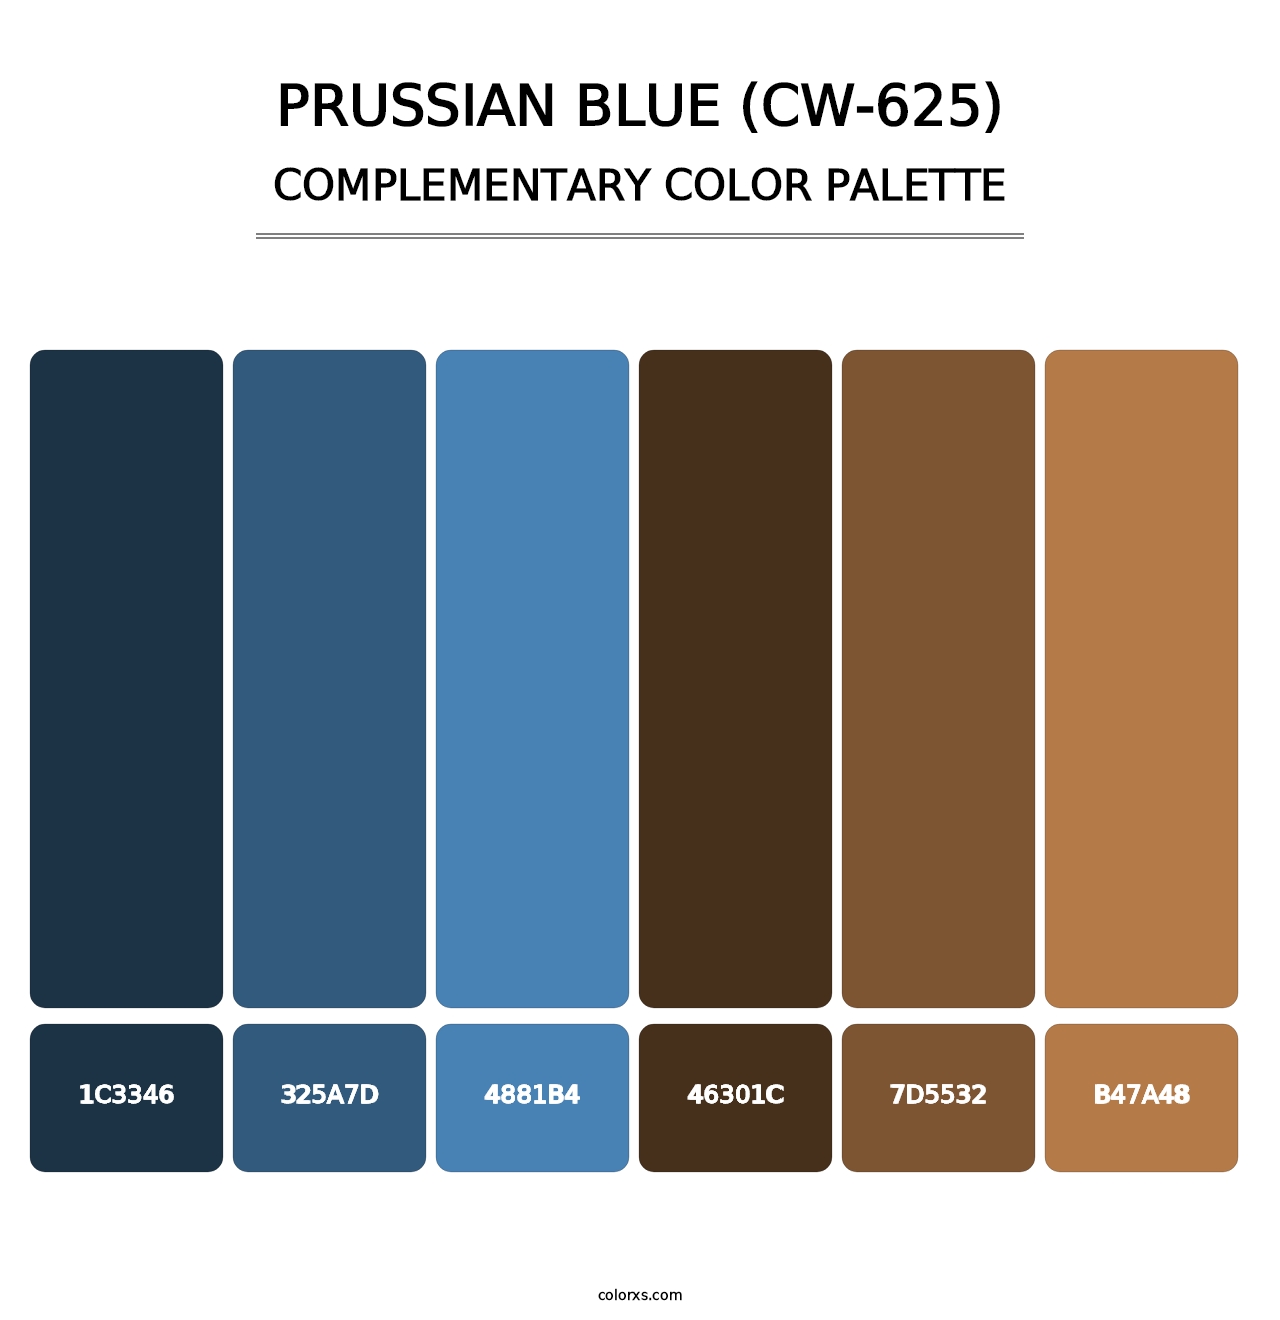 Prussian Blue (CW-625) - Complementary Color Palette